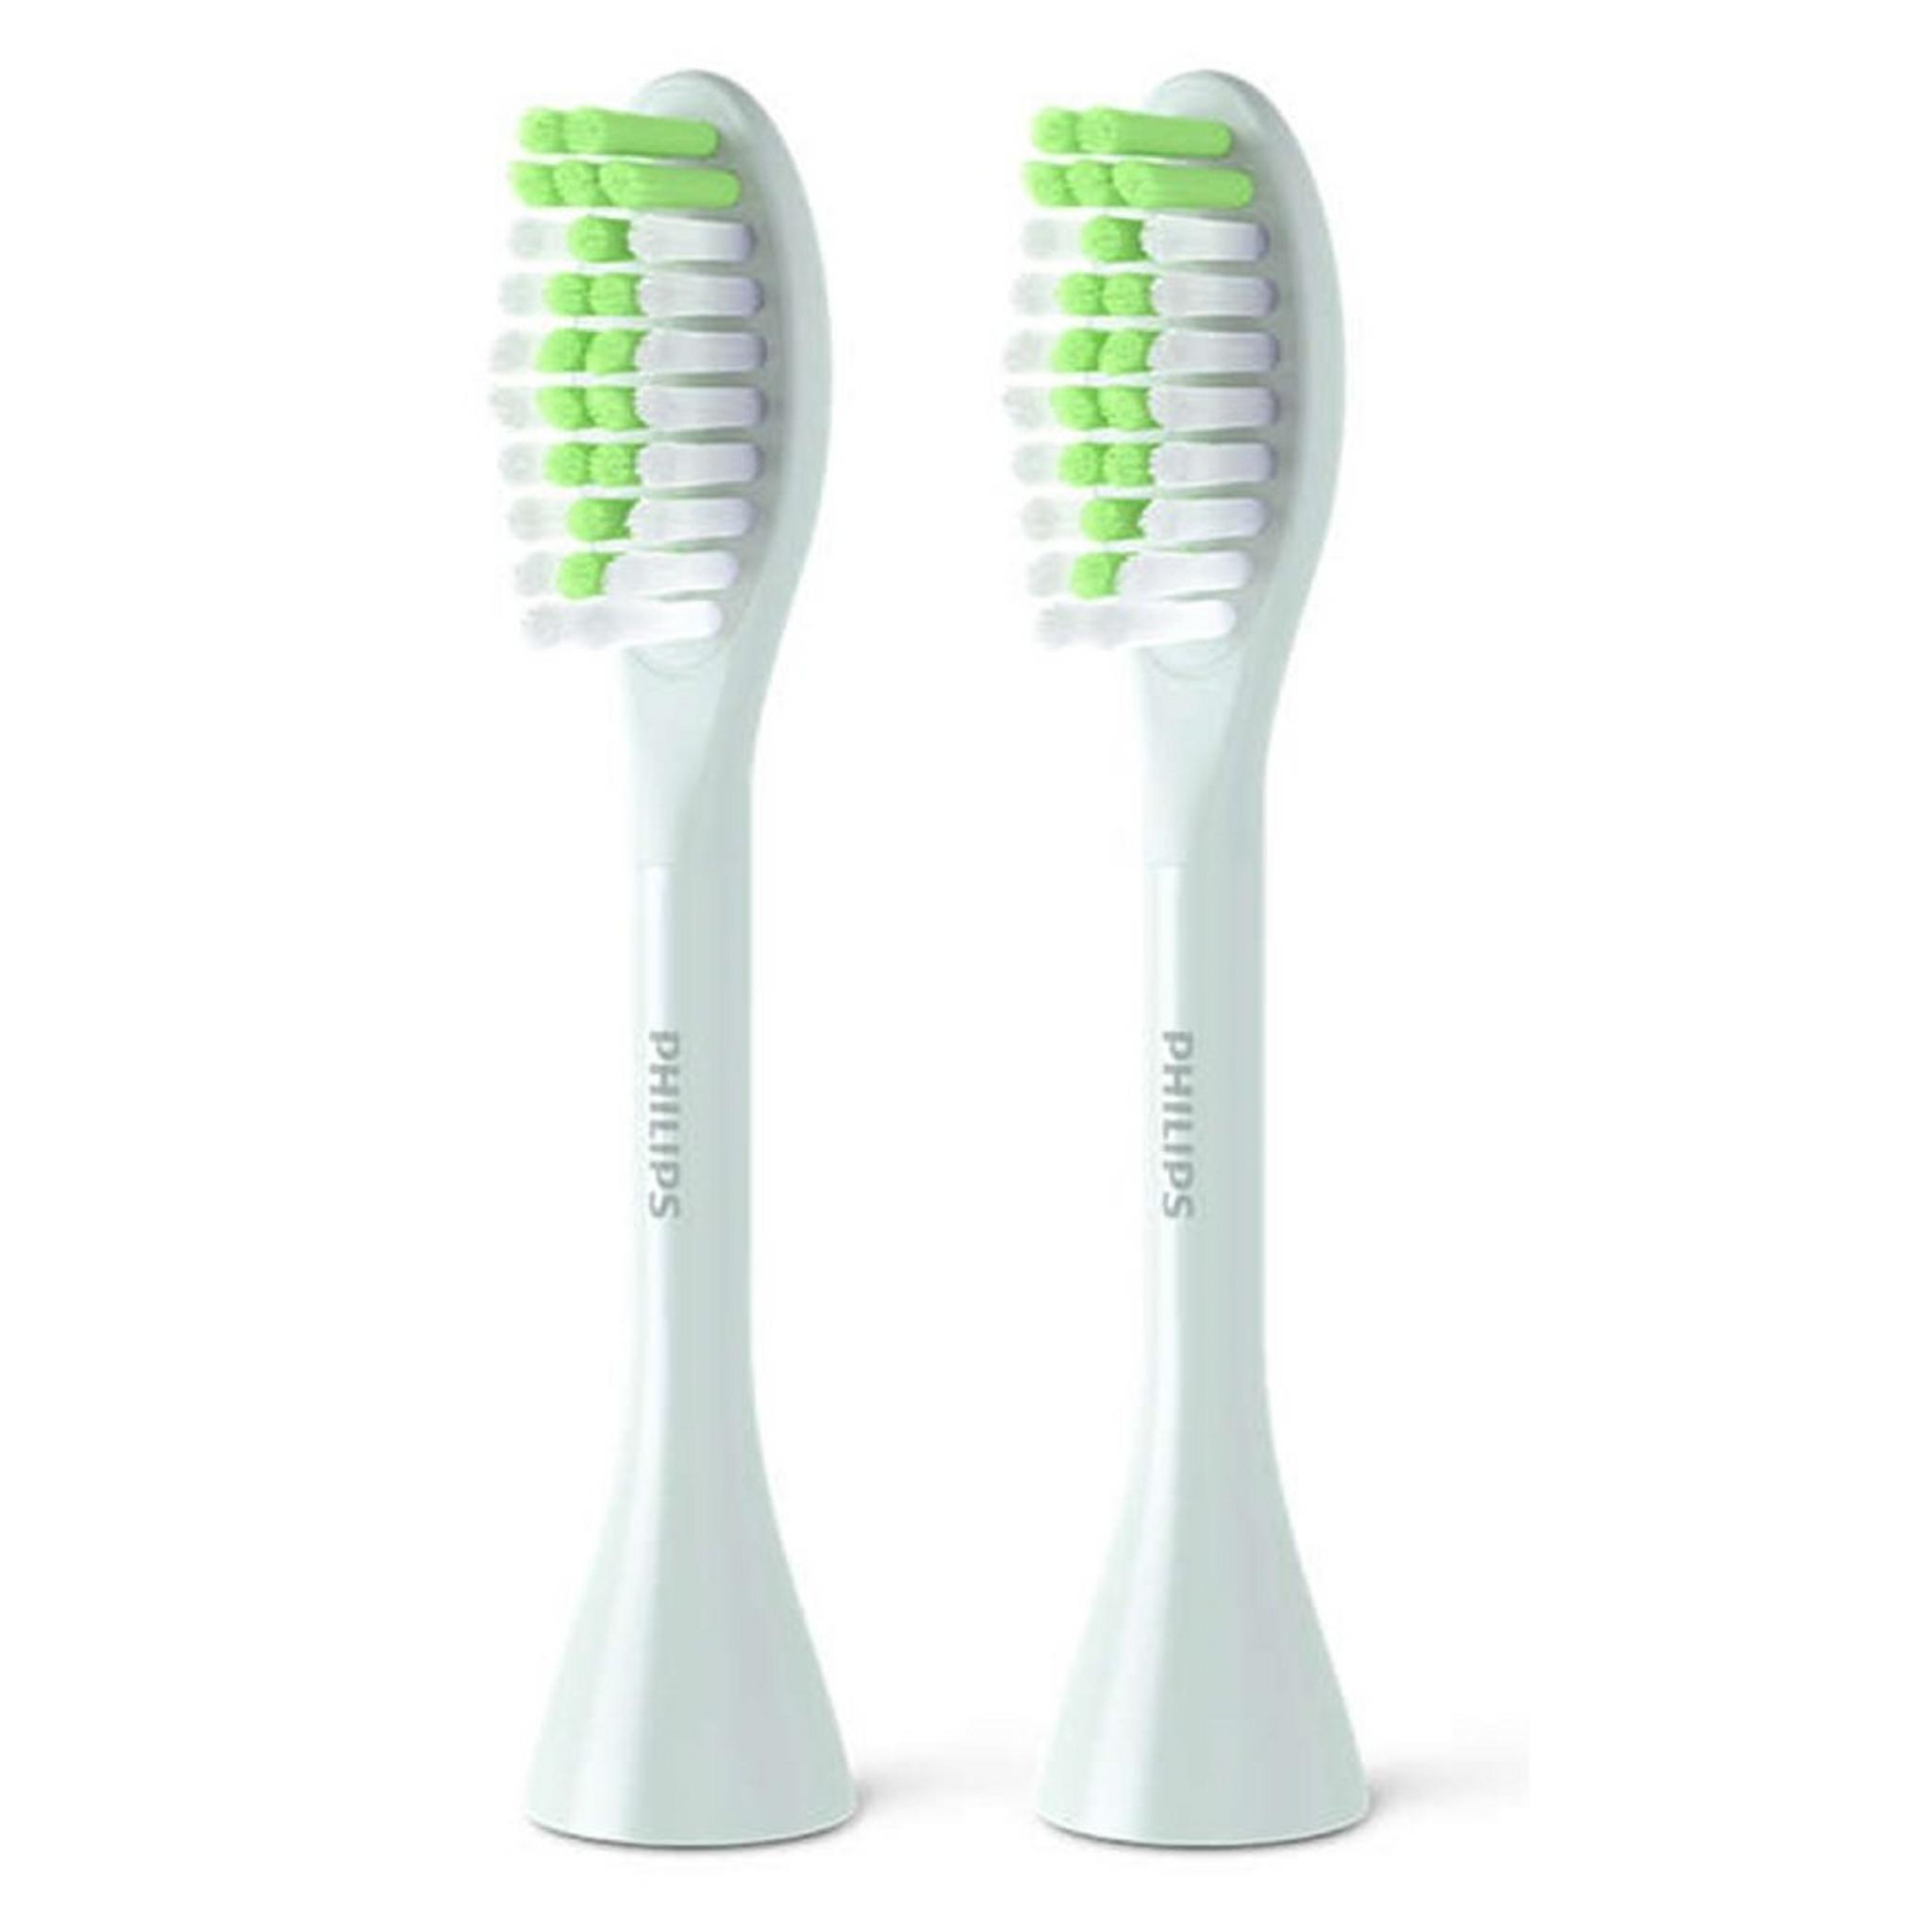 Philips One Head Toothbrush Mint Blue (BH1022/03)